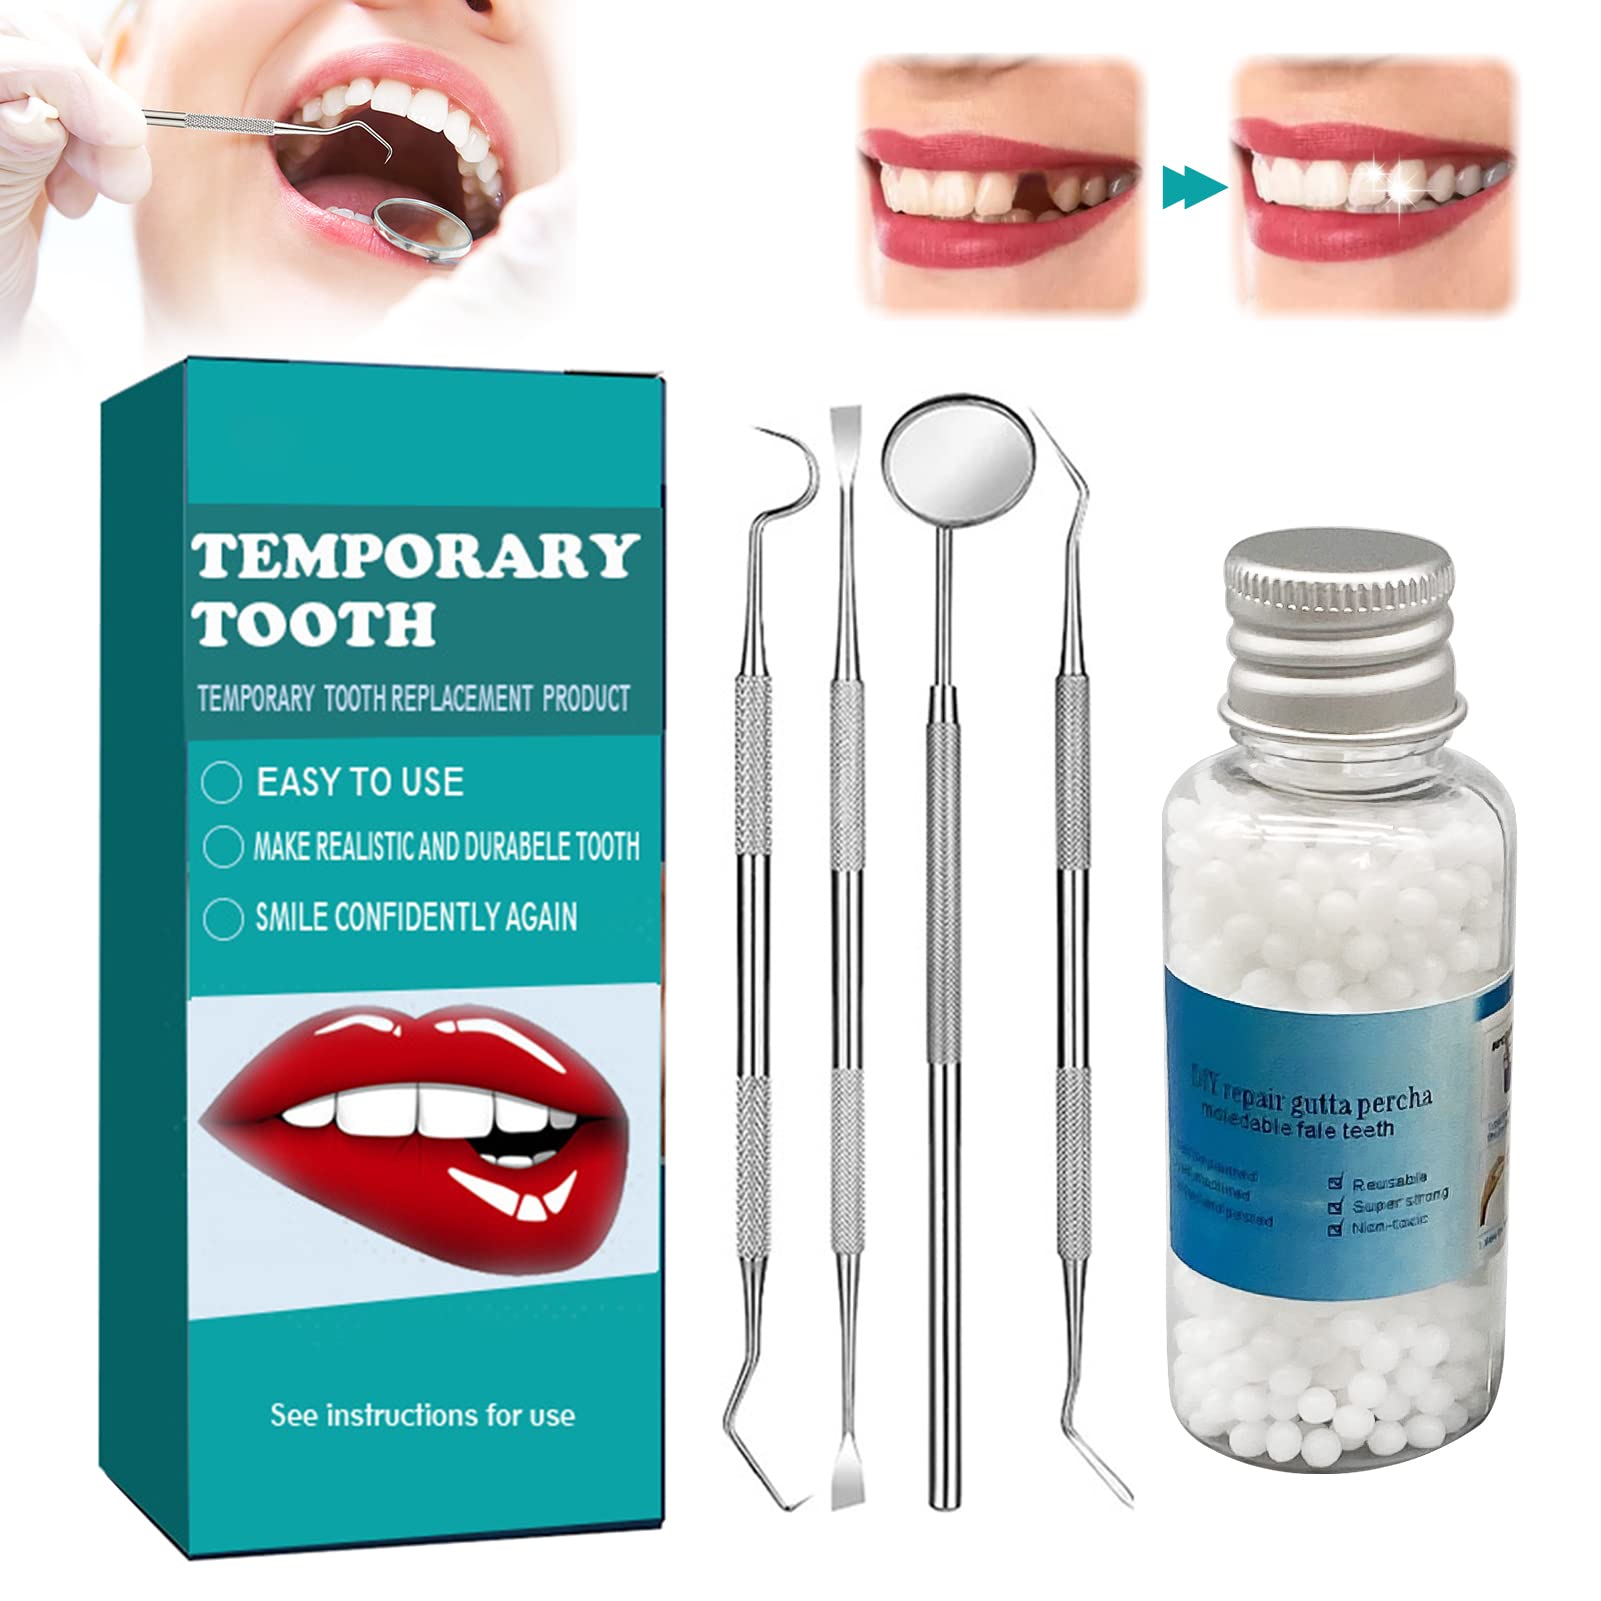 Best Deal for Tooth Repair Kit, Moldable Fake Teeth for Temporary Teeth